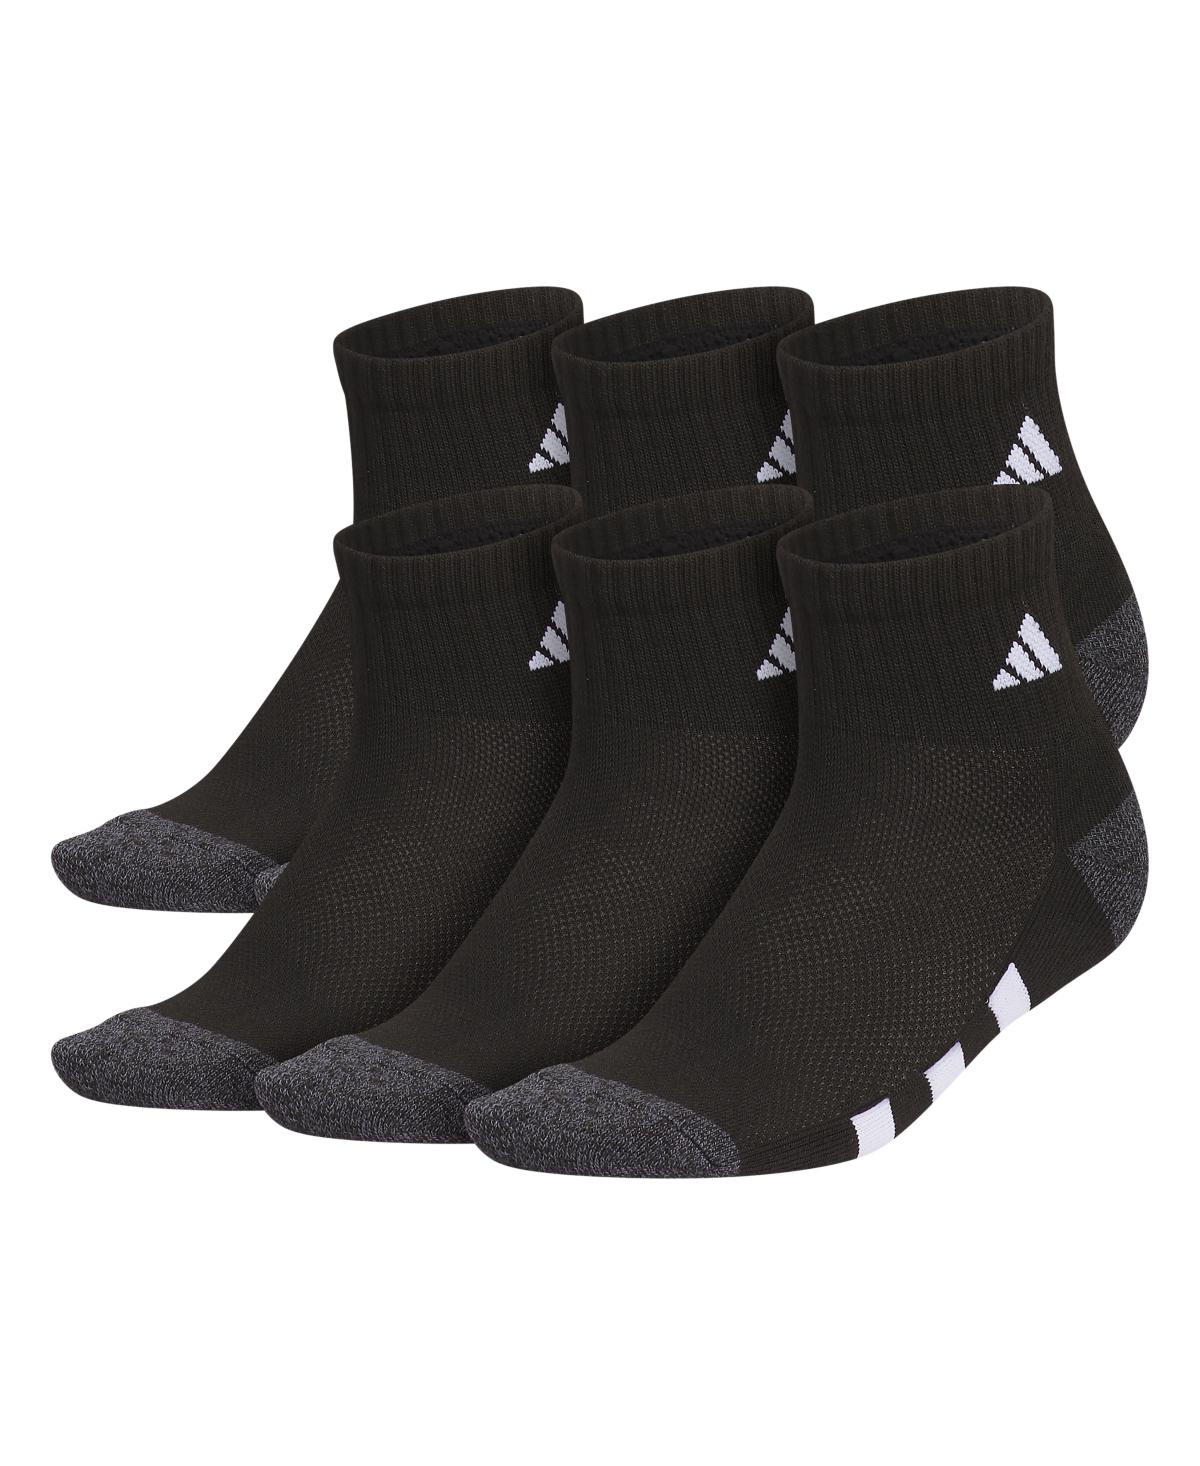 Shop Adidas Originals Boys Youth Athletic Cushioned Quarter Socks, Pack Of 6 In Black